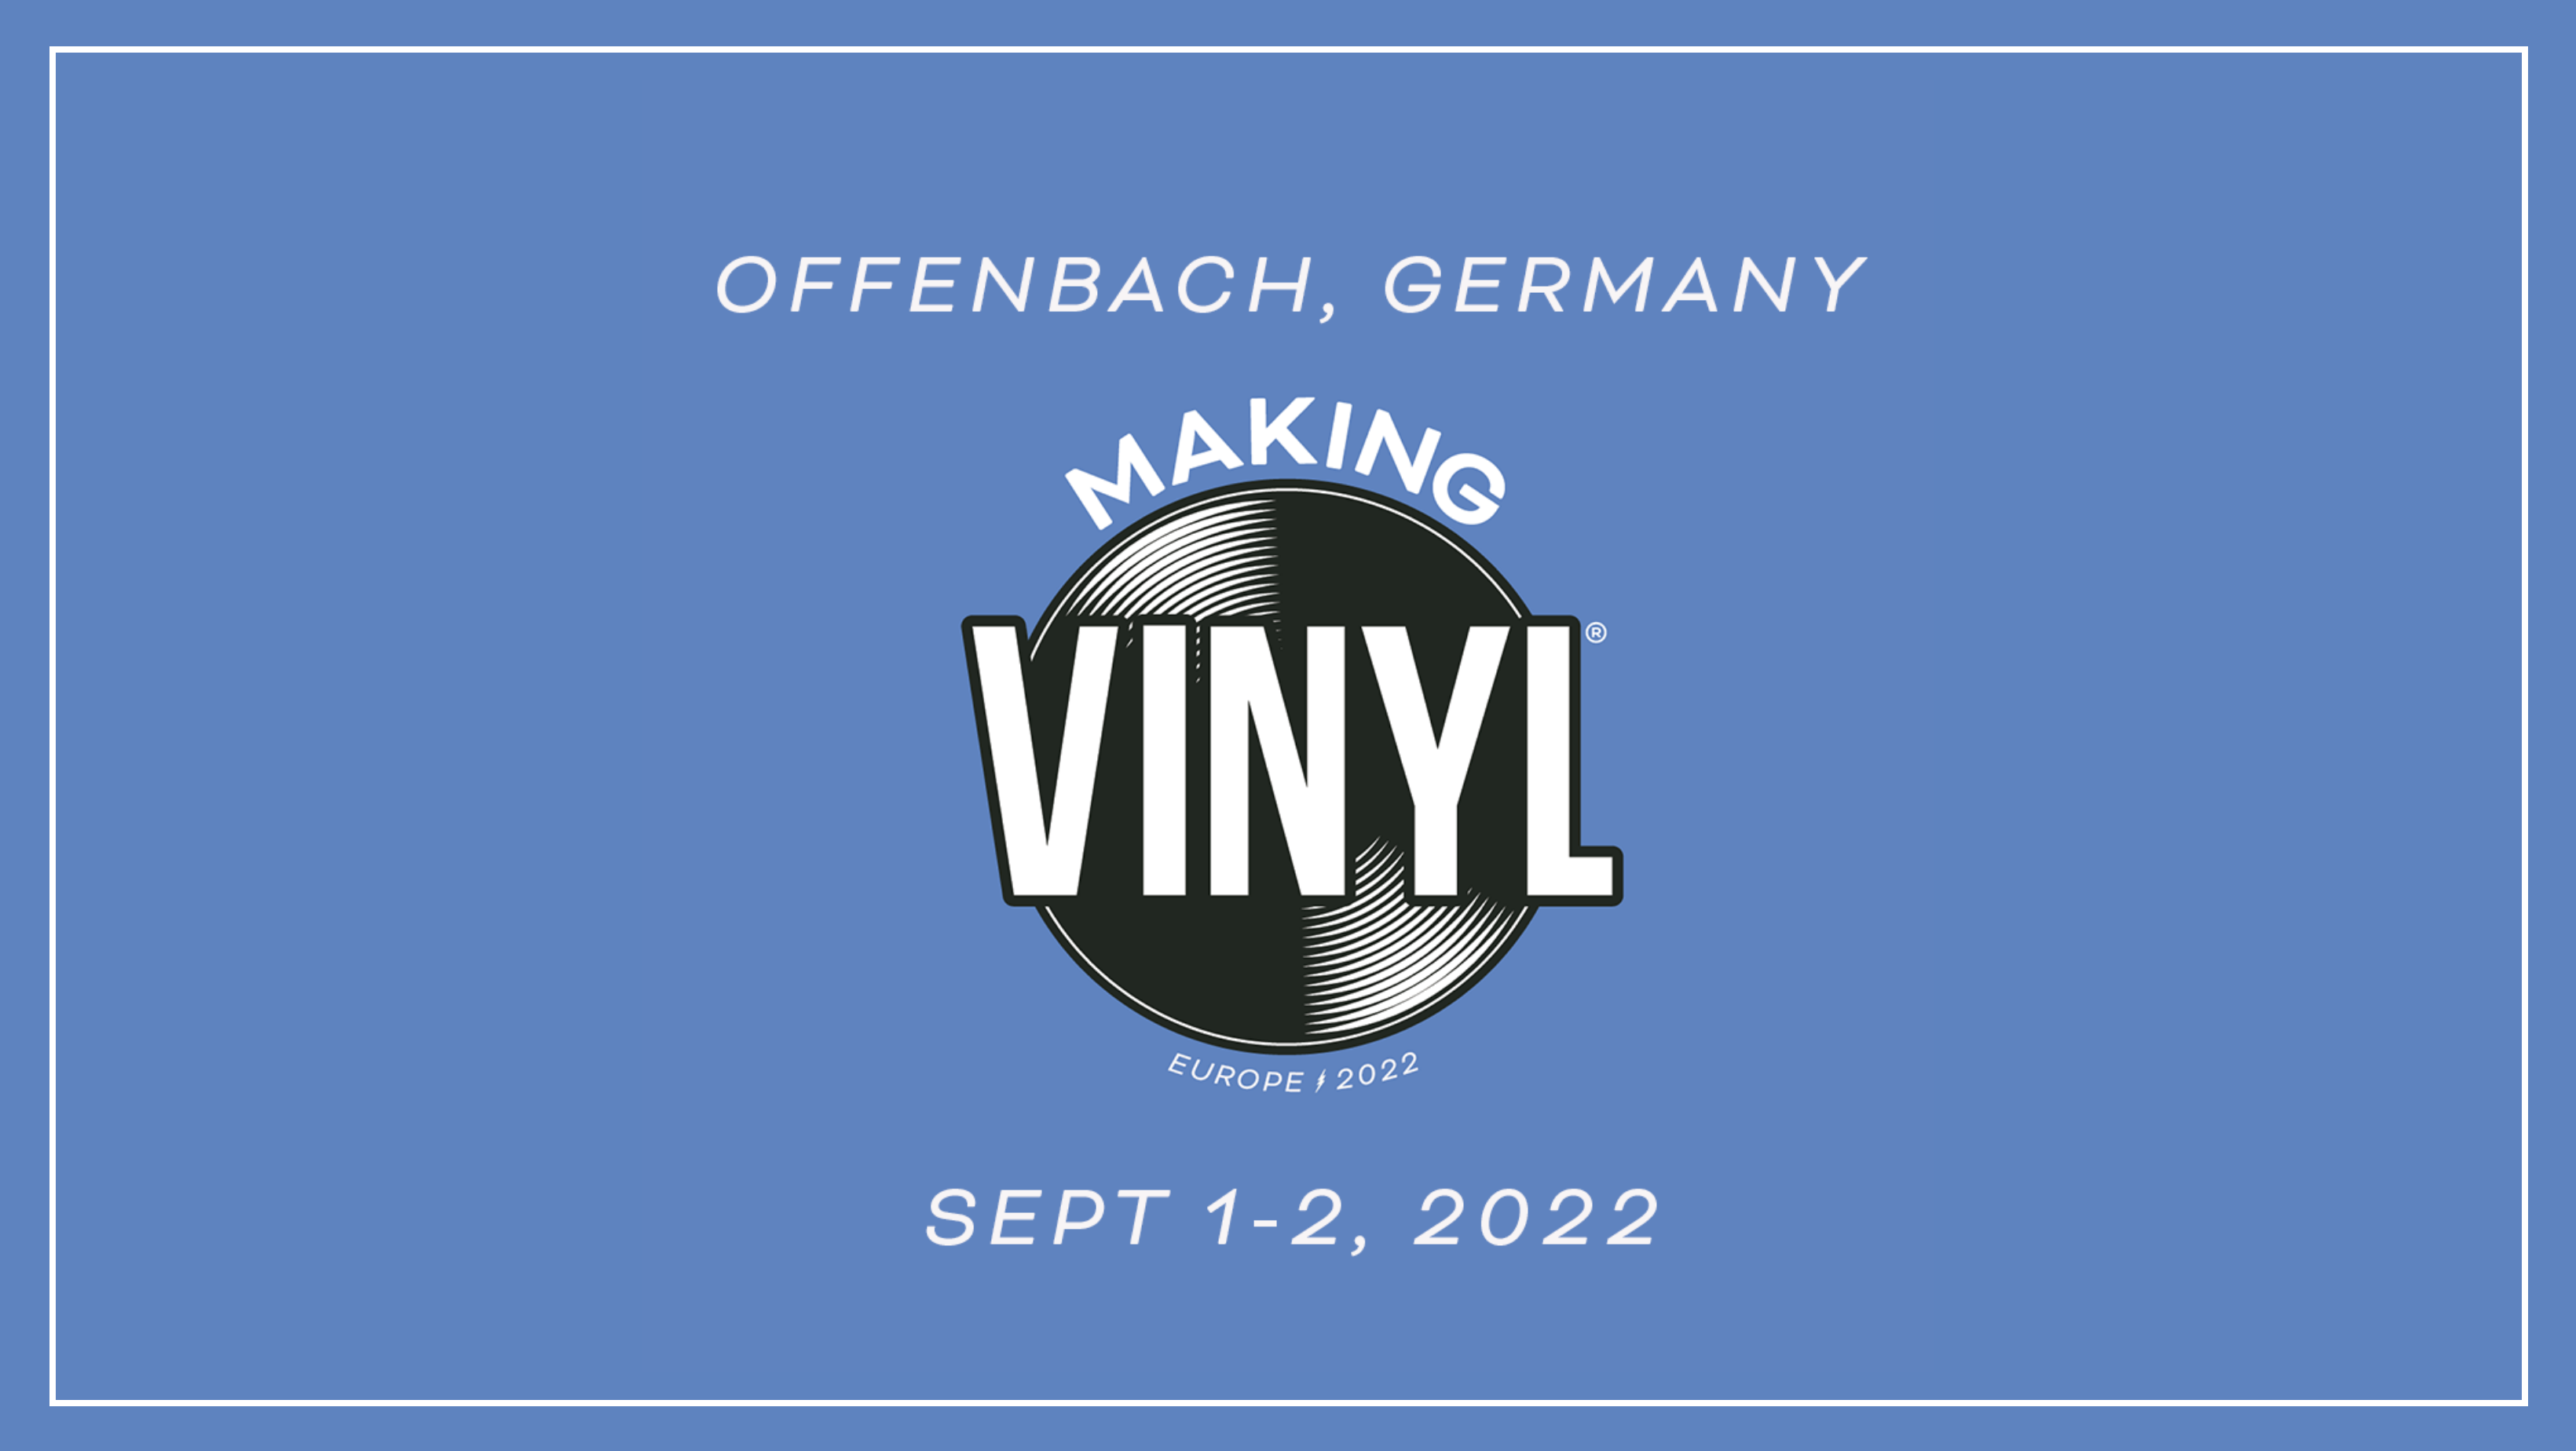 Making Vinyl & Physical Media World Conference 2022